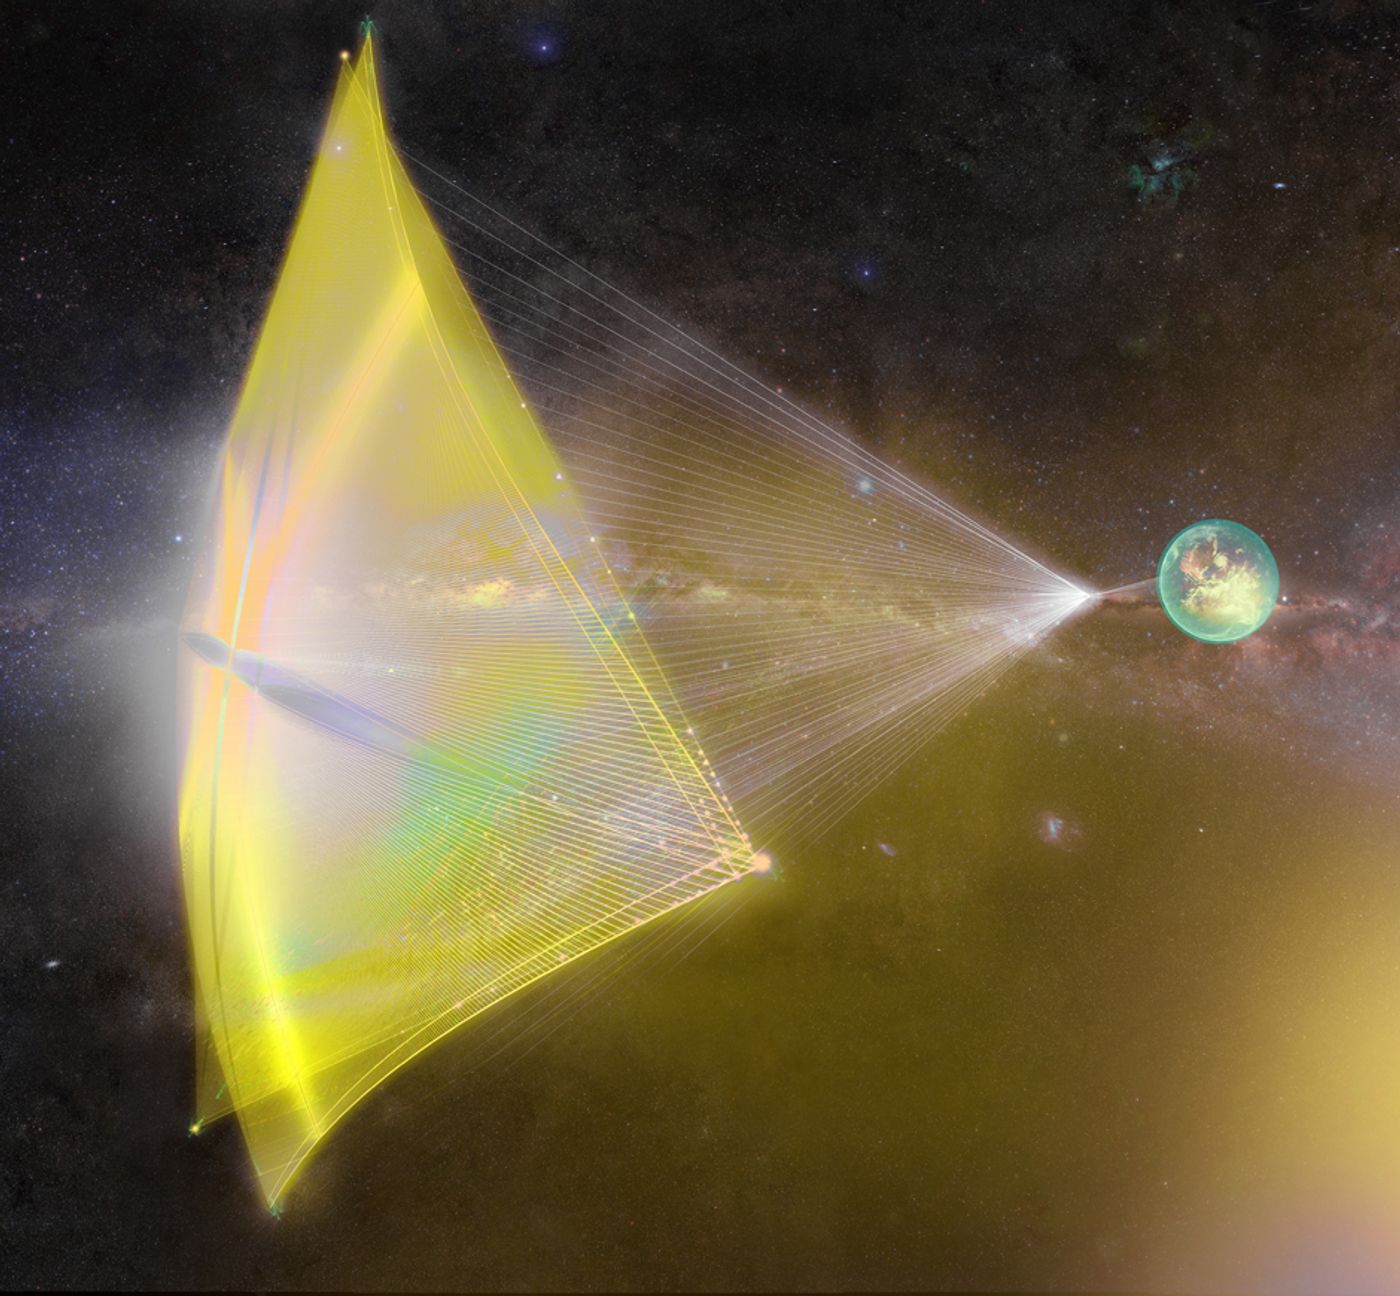 Stephen Hawking wants to accelerate nano spacecrafts to other star systems in the universe.